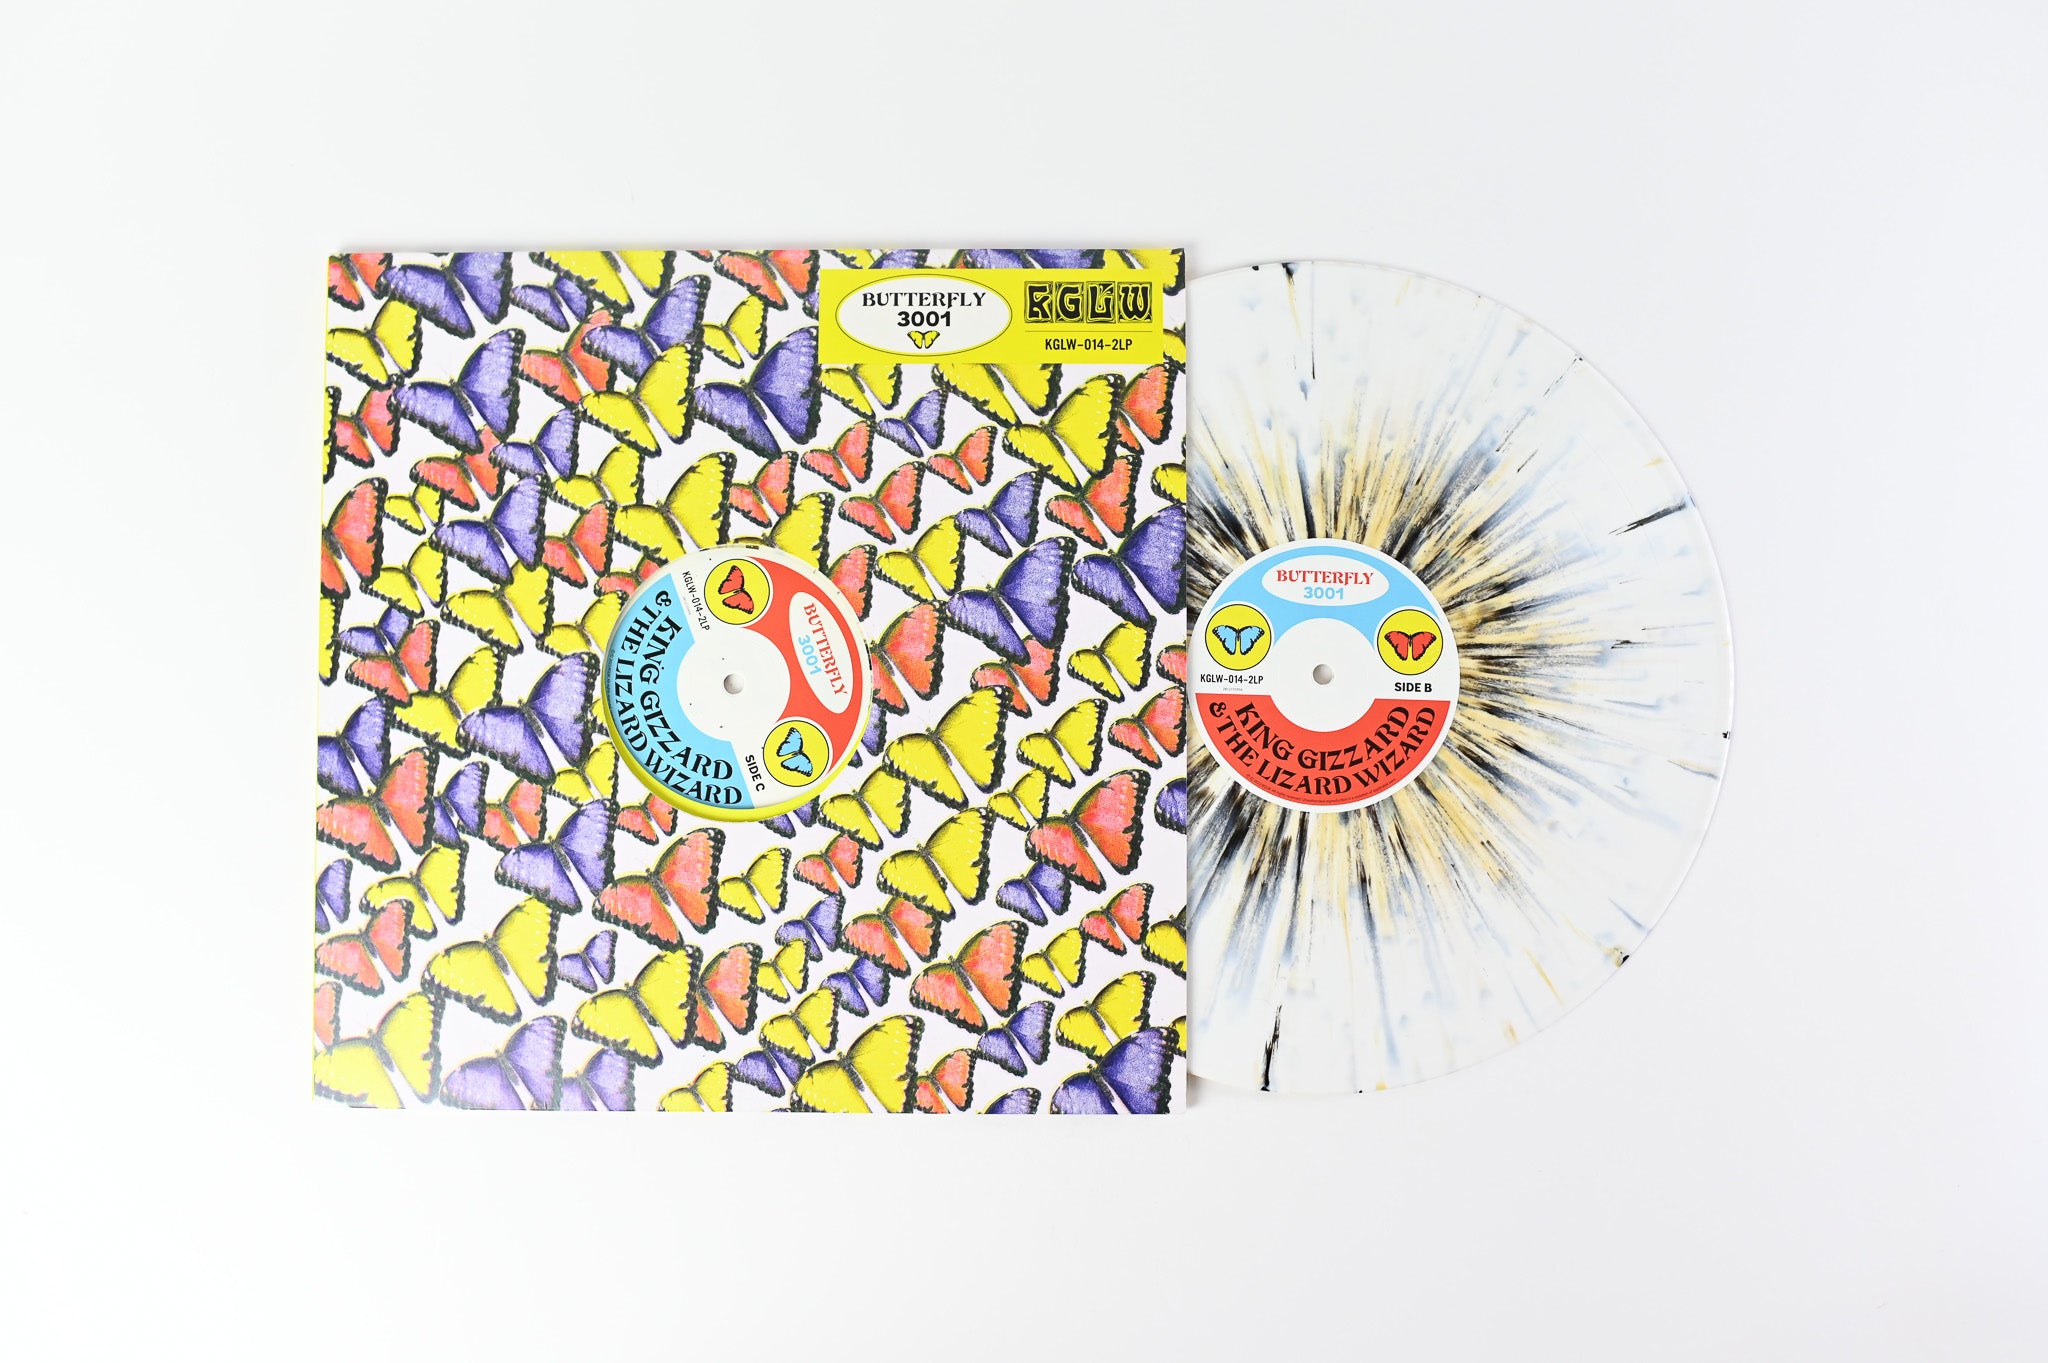 King Gizzard And The Lizard Wizard - Butterfly 3001 Ltd White with Black and Yellow Calypso Splatter